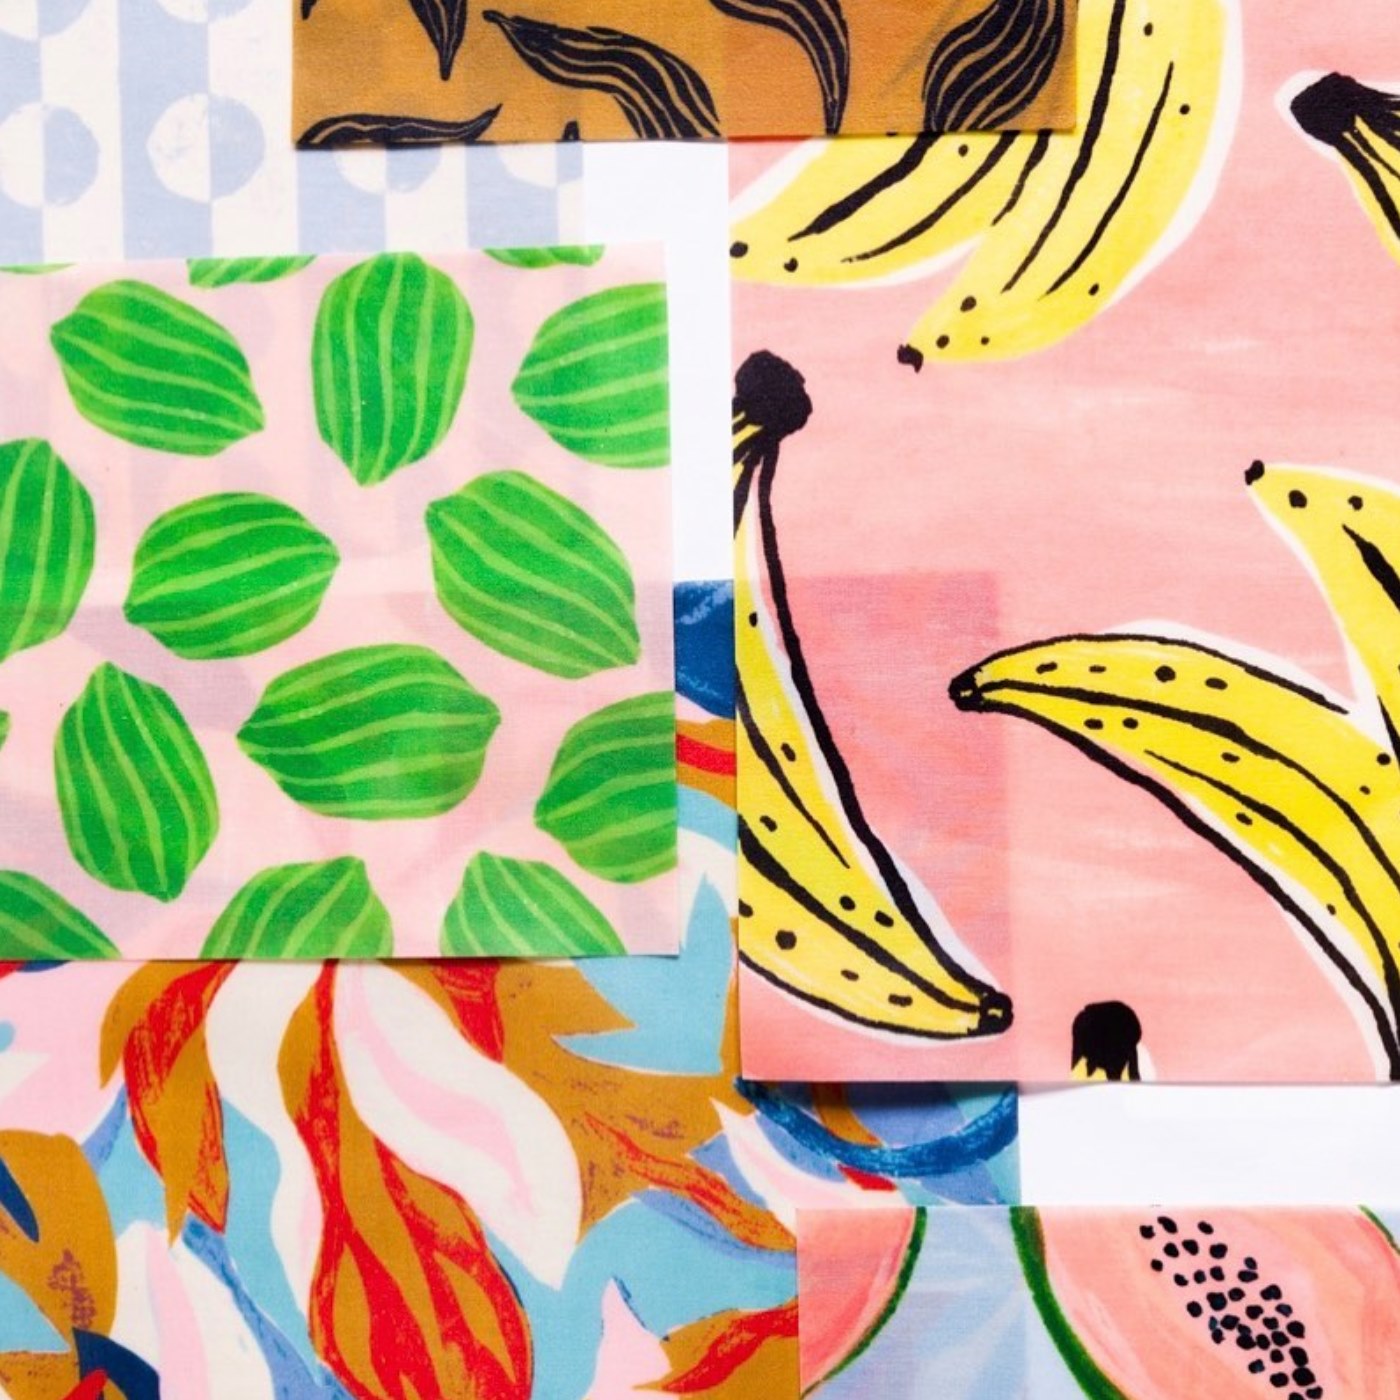 Beeswax wraps, like these made locally by Supra Endura, are a great sustainable alternative to plastic wrap. Image: Supra Endura